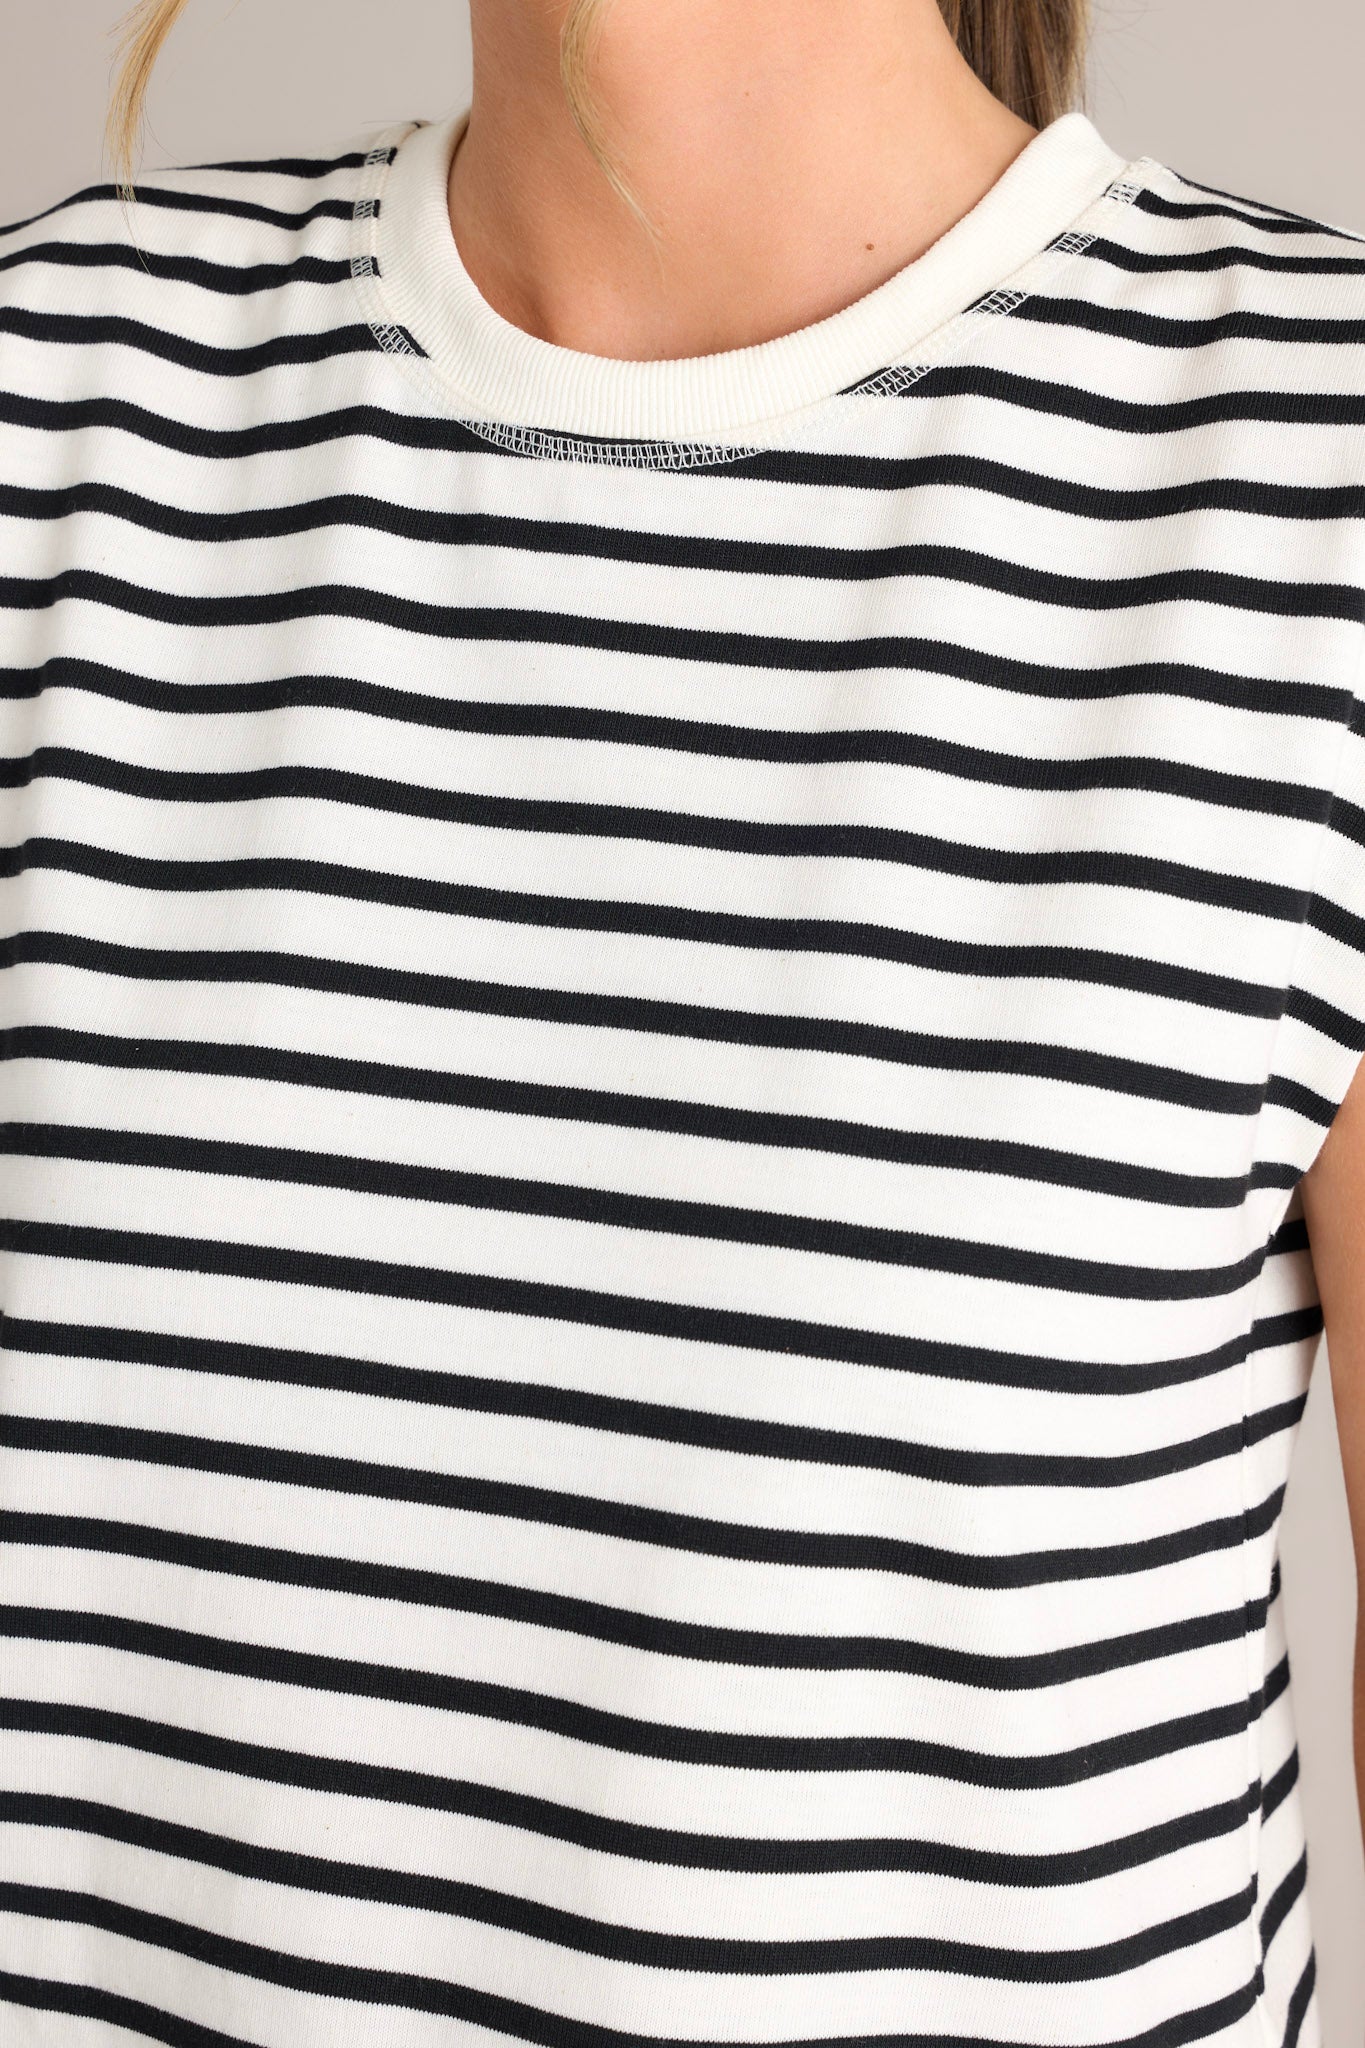 Detailed view on the fabric of this white stripe top that features a crew neckline, short cap sleeves, and a classic stripe pattern.